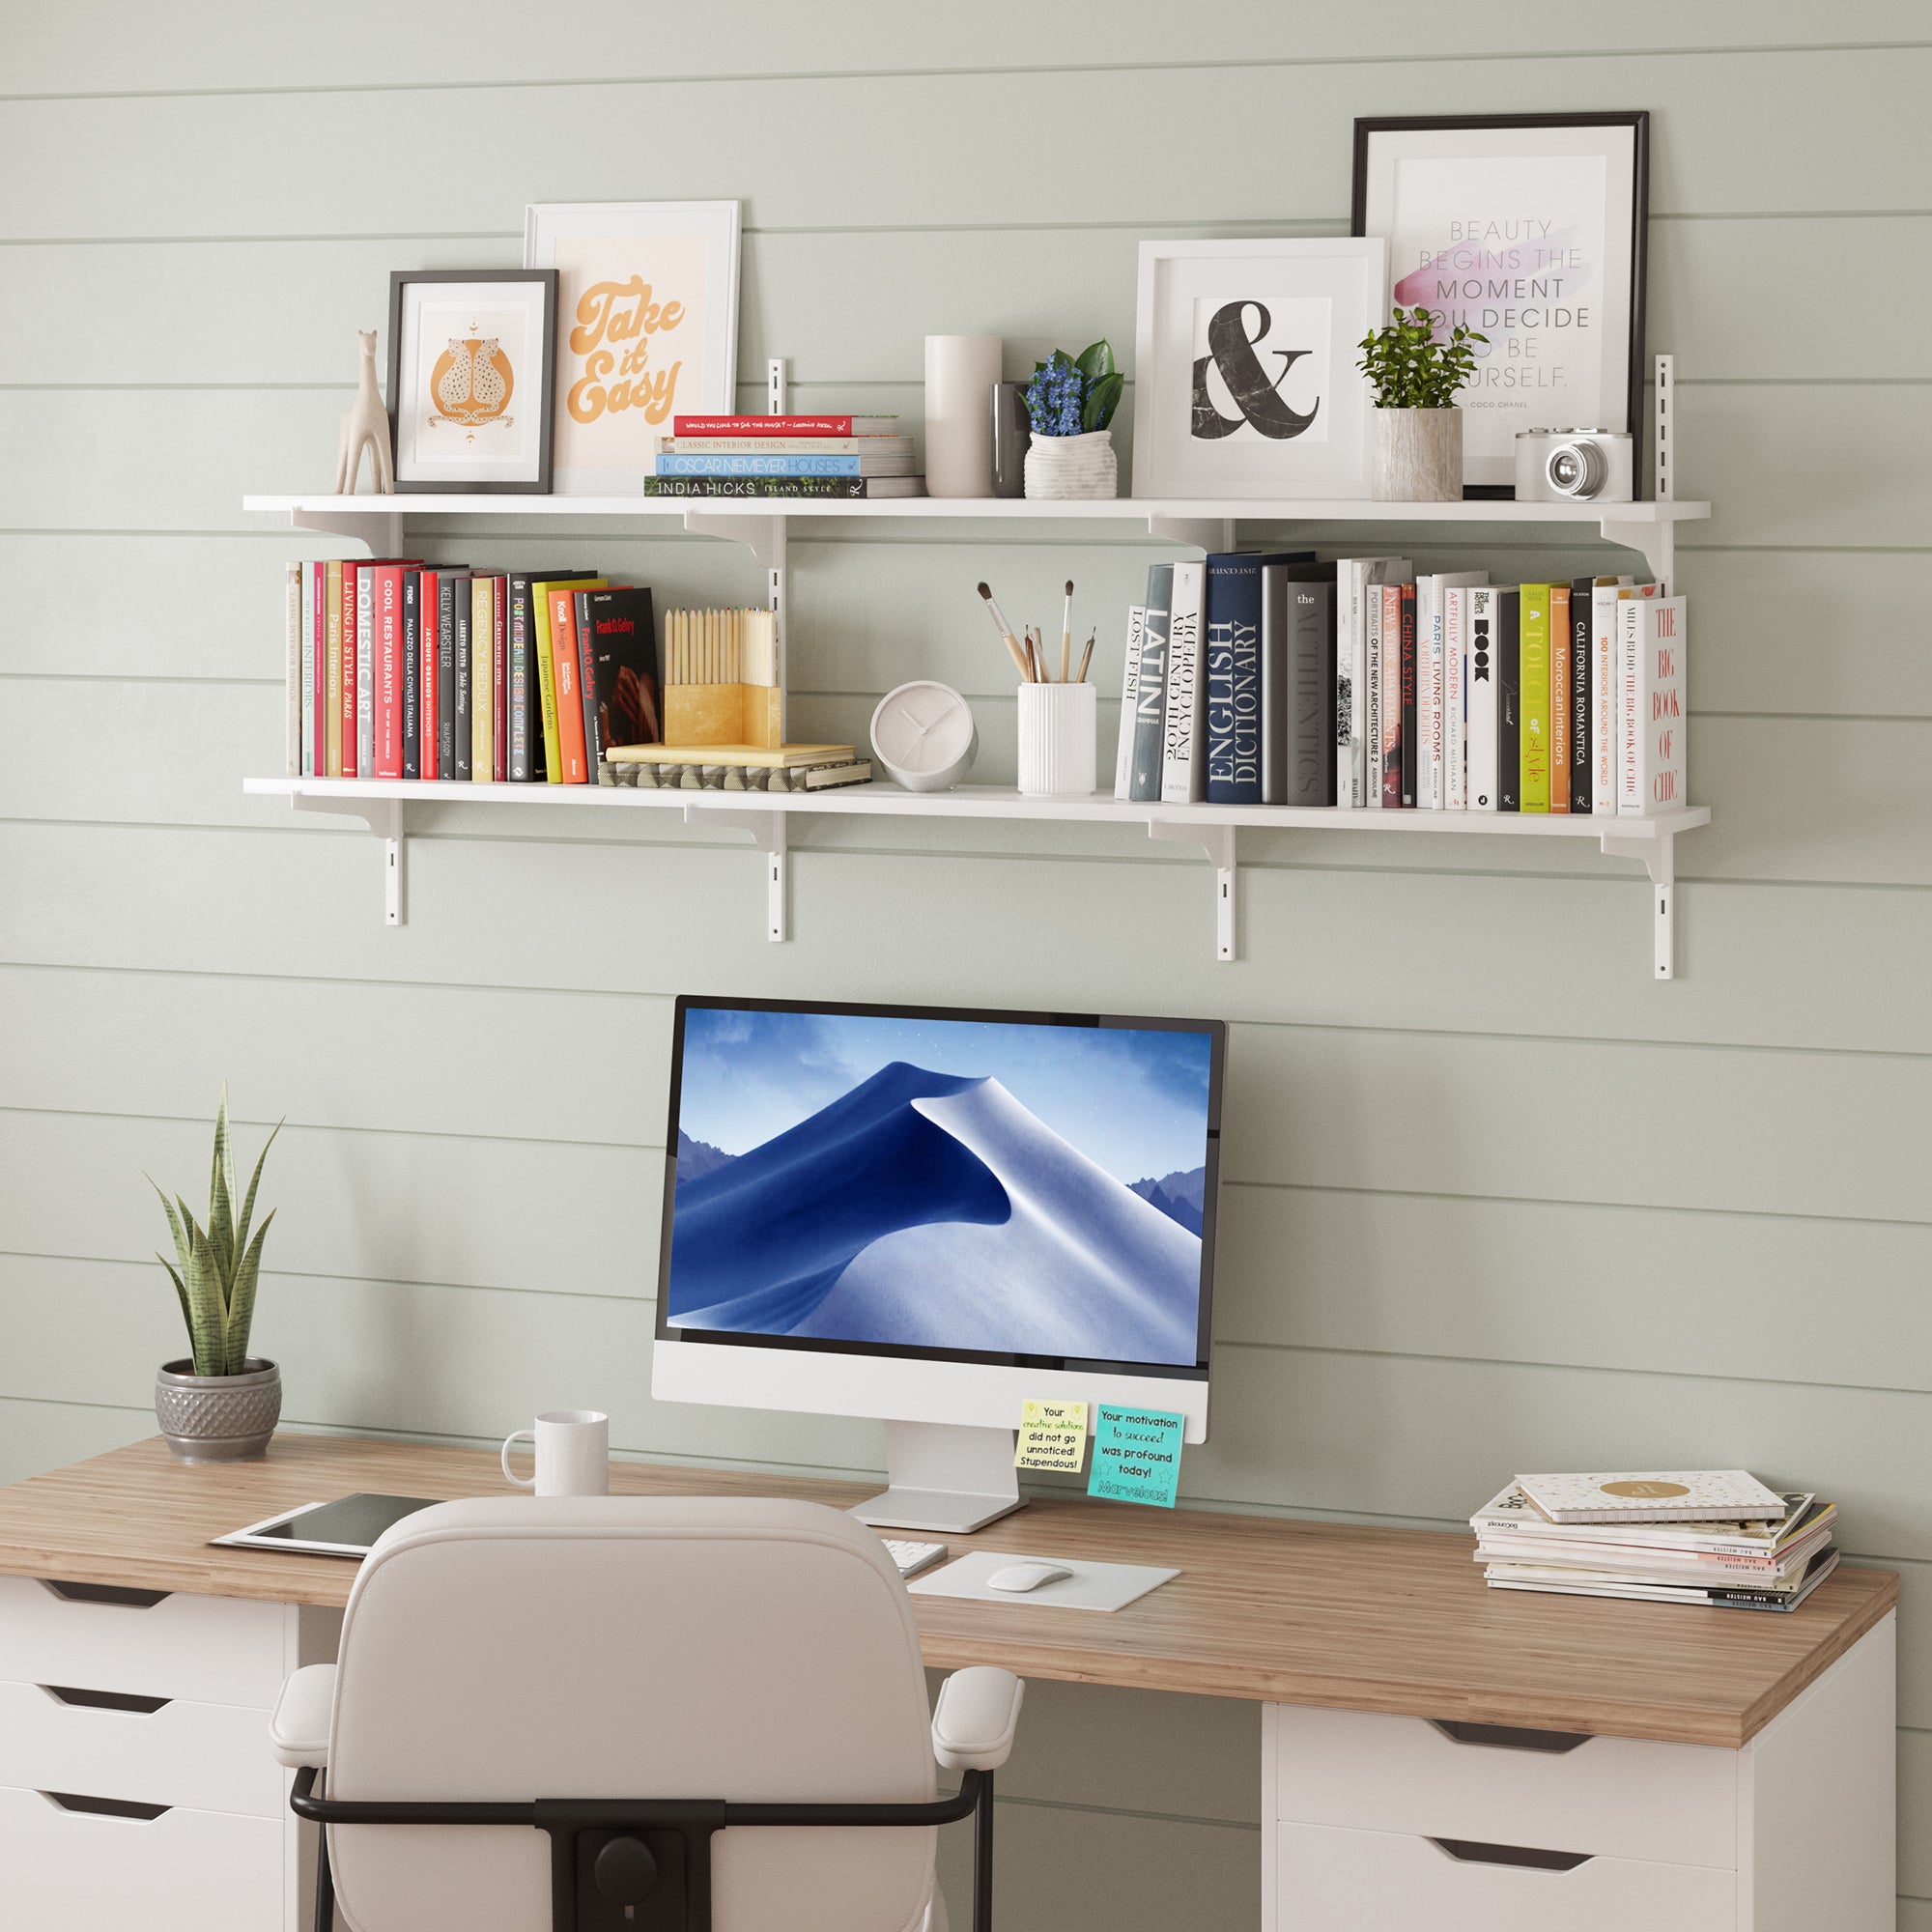 Wall shelves for office setup with books, frames, and a serene workspace vibe.